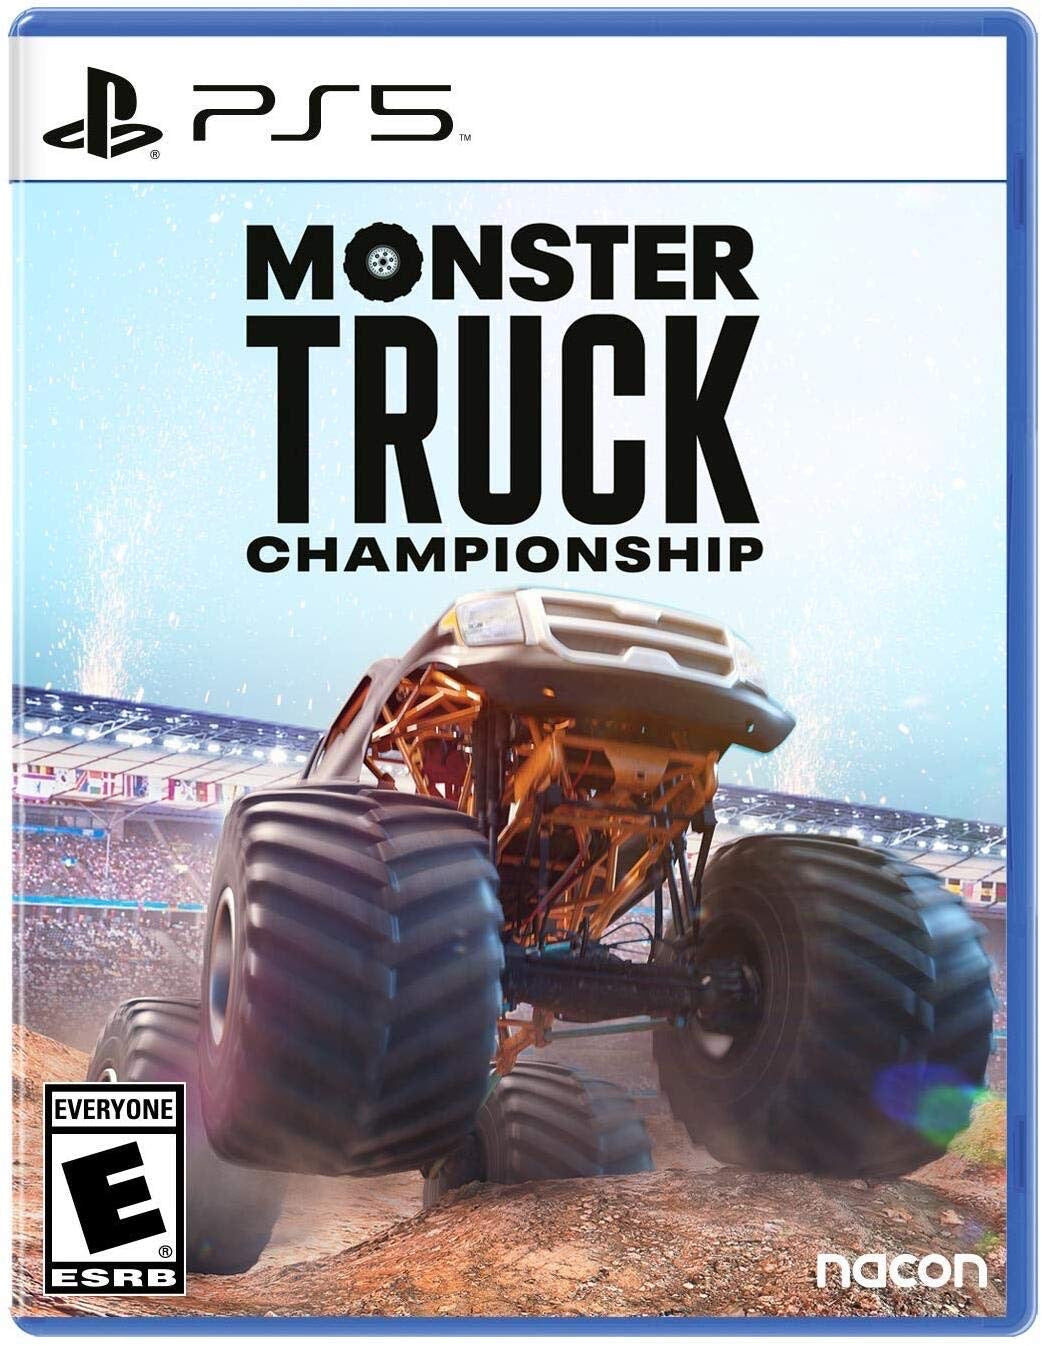 PS5 MONSTER TRUCK video game